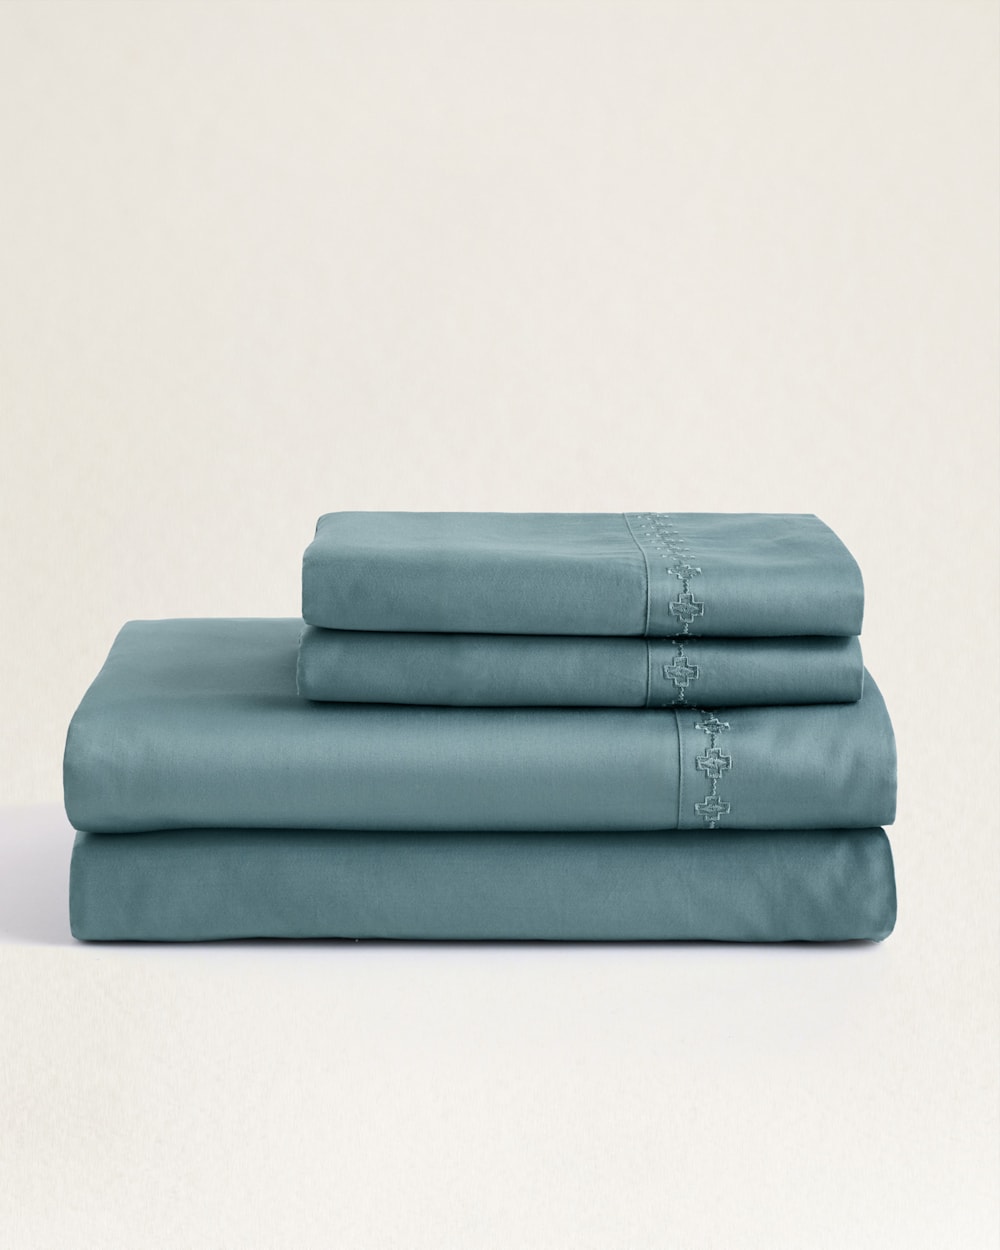 ALTERNATE VIEW OF HARDING EMBROIDERED PILLOWCASES IN SILVER BLUE image number 2